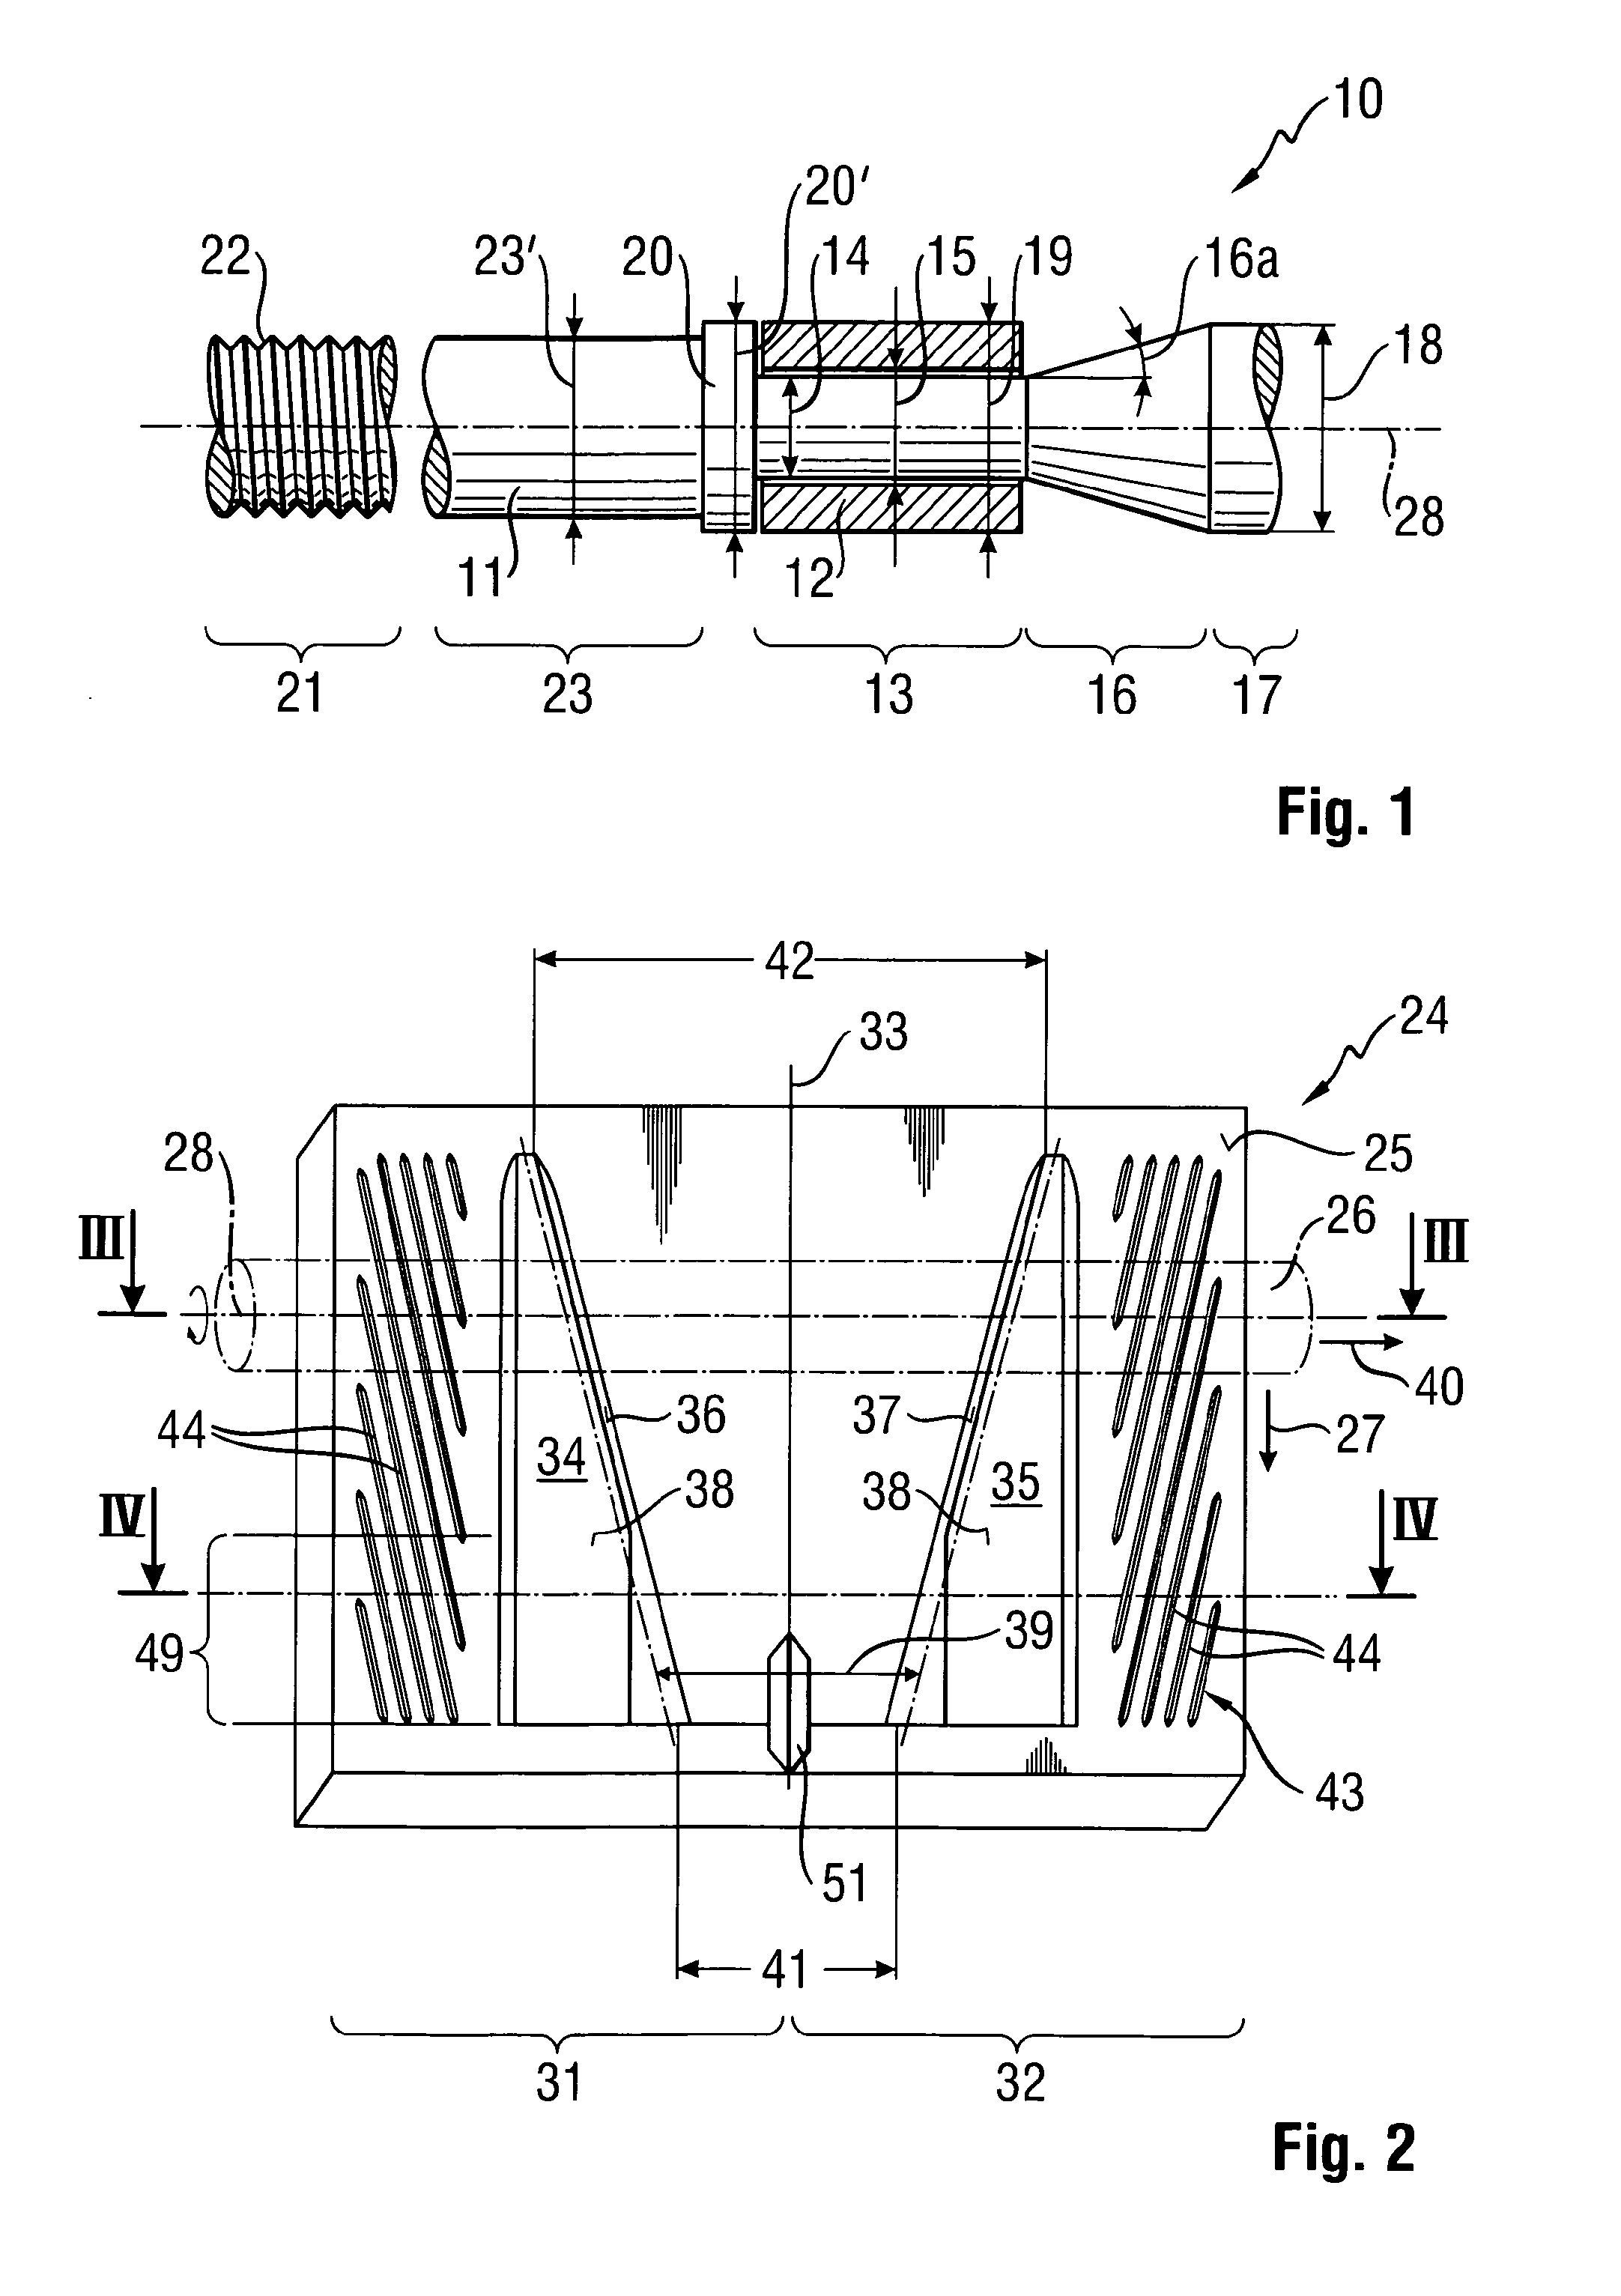 Method of Forming Anchors